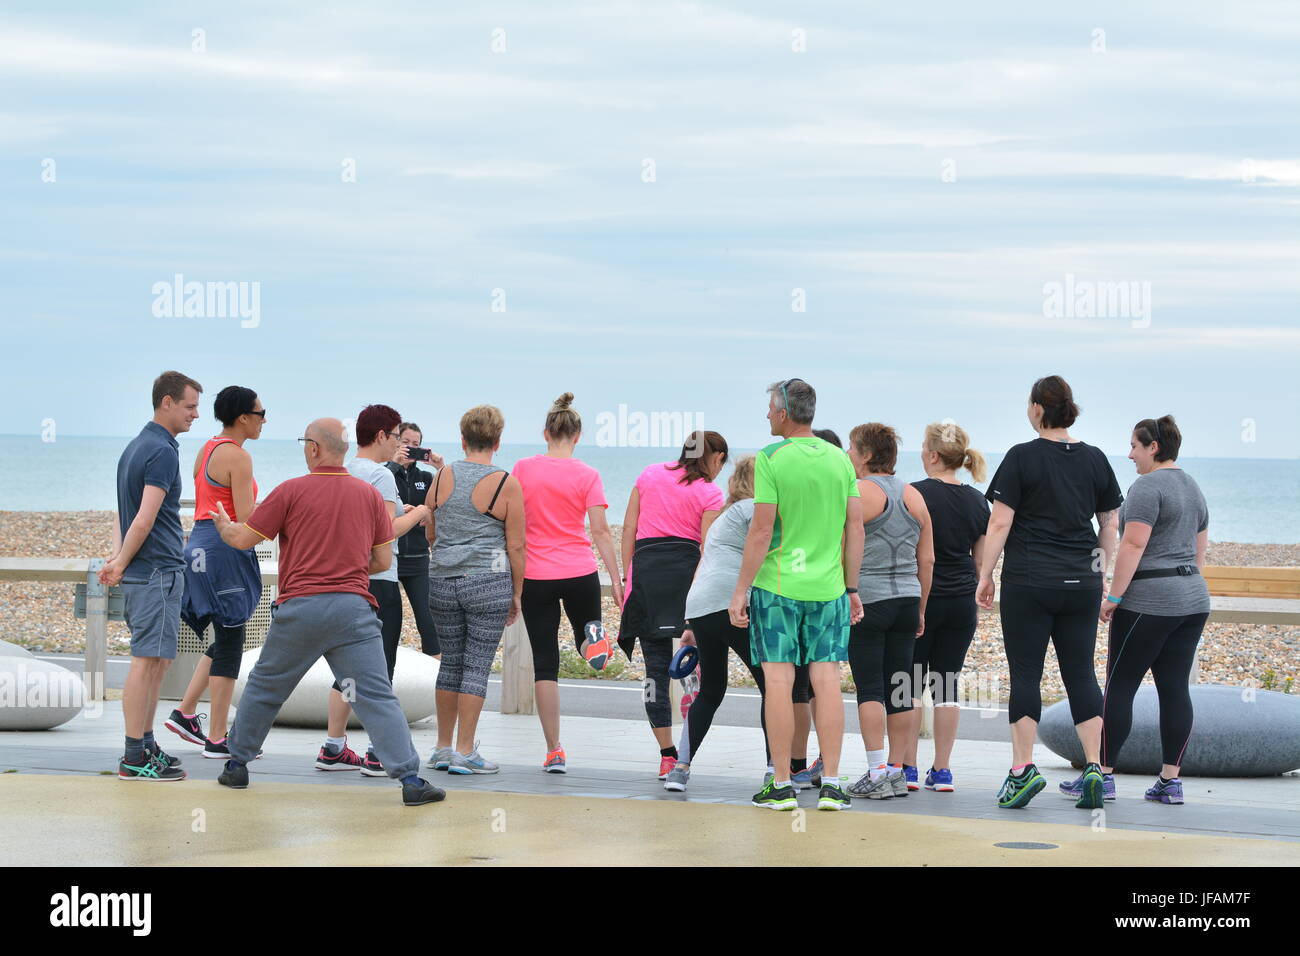 People exercising at an outdoor fitness class on the seafront promenade in Worthing, West Sussex, England, UK. Stock Photo